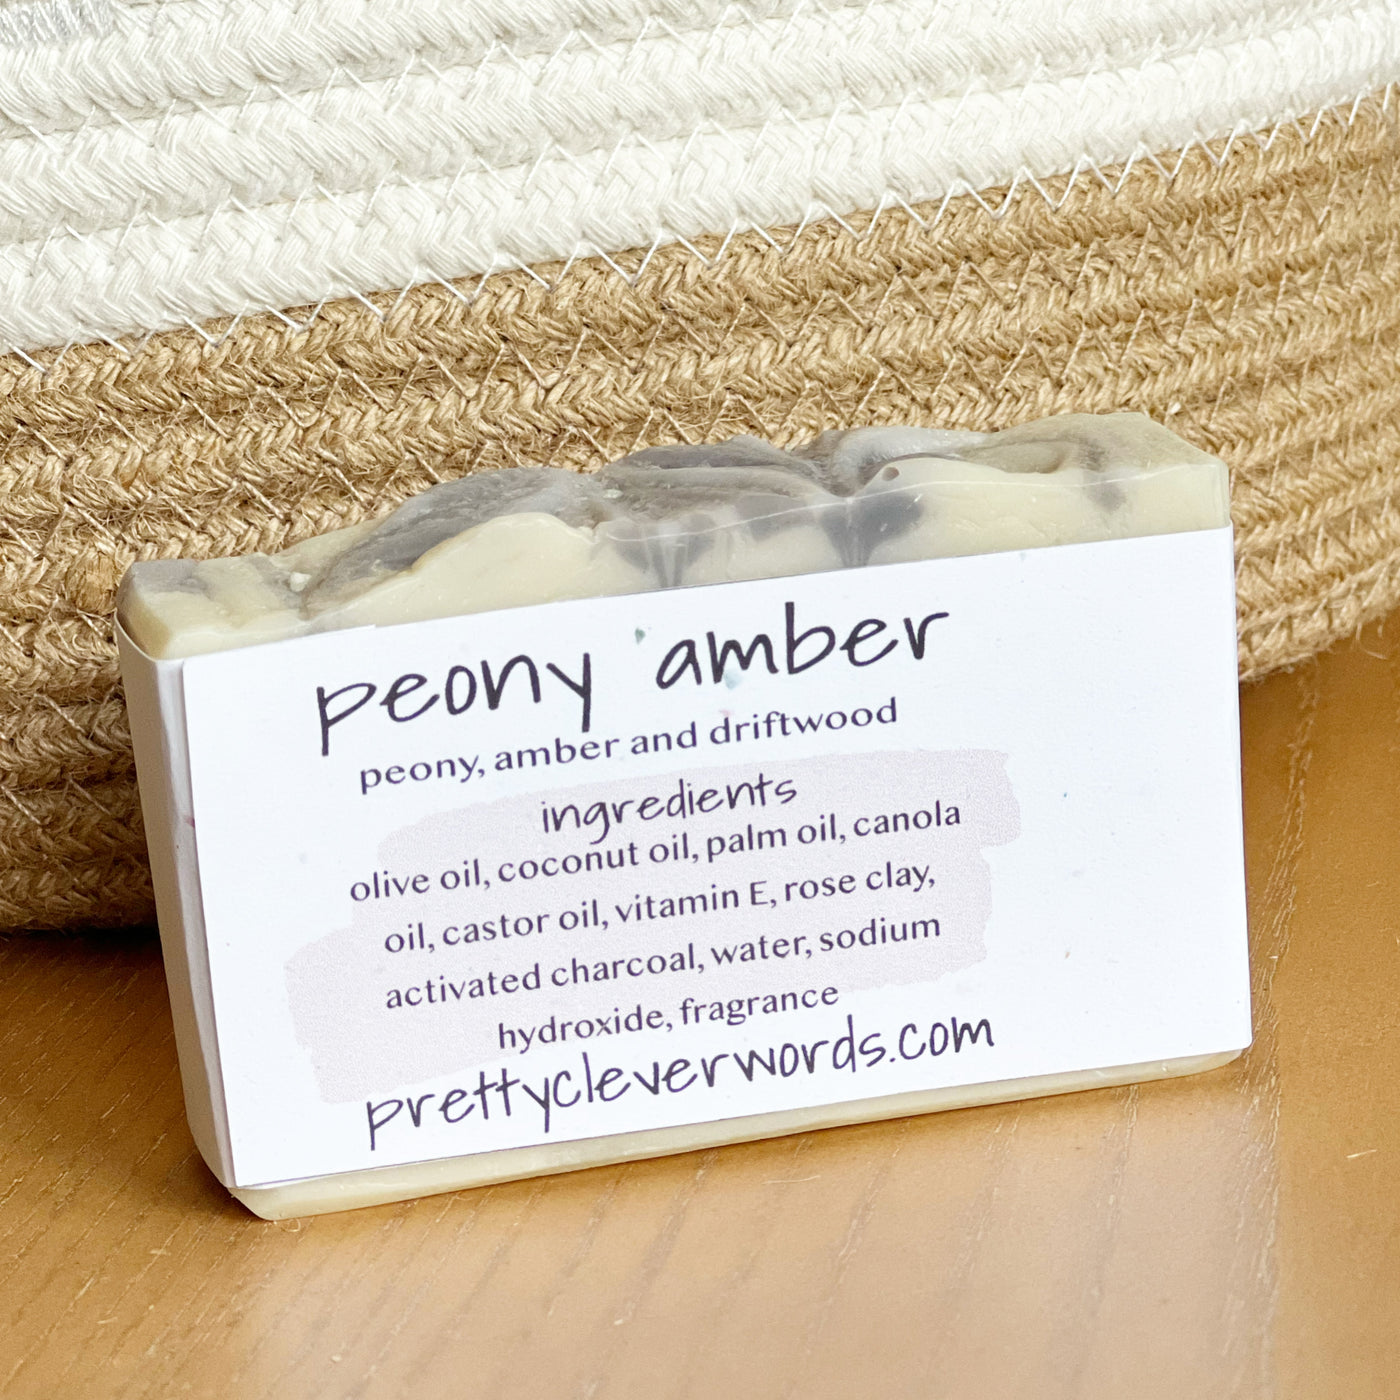 clever+clean peony amber bar soap - i exist entirely on sarcasm and caffeine